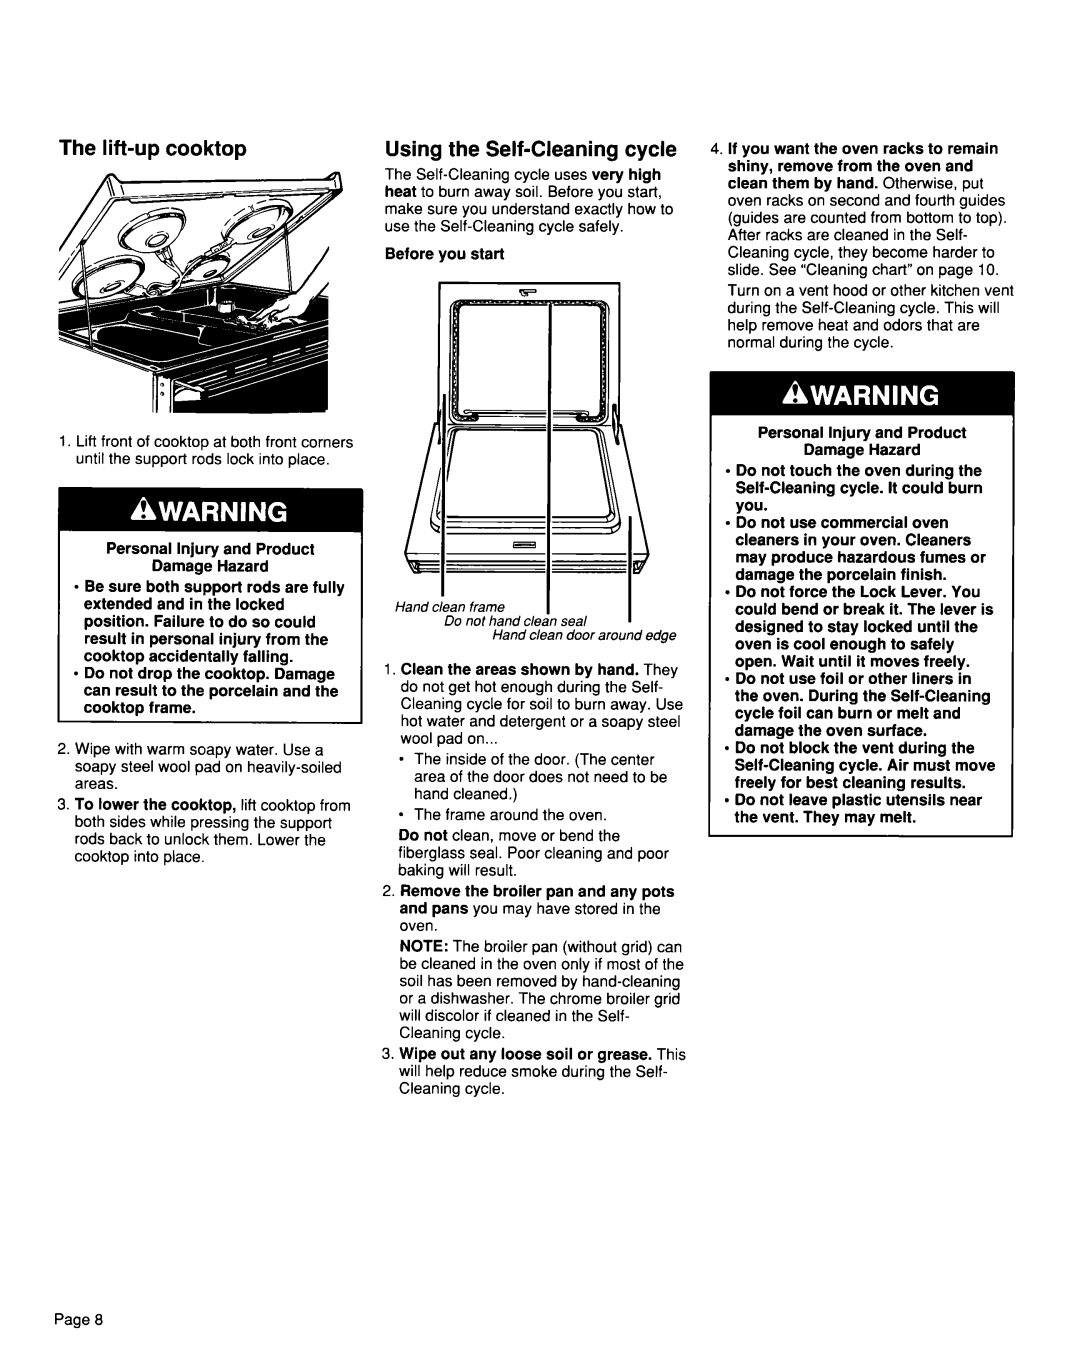 Whirlpool TER46WOW installation instructions The lift-upcooktop, Using the Self-Cleaningcycle 